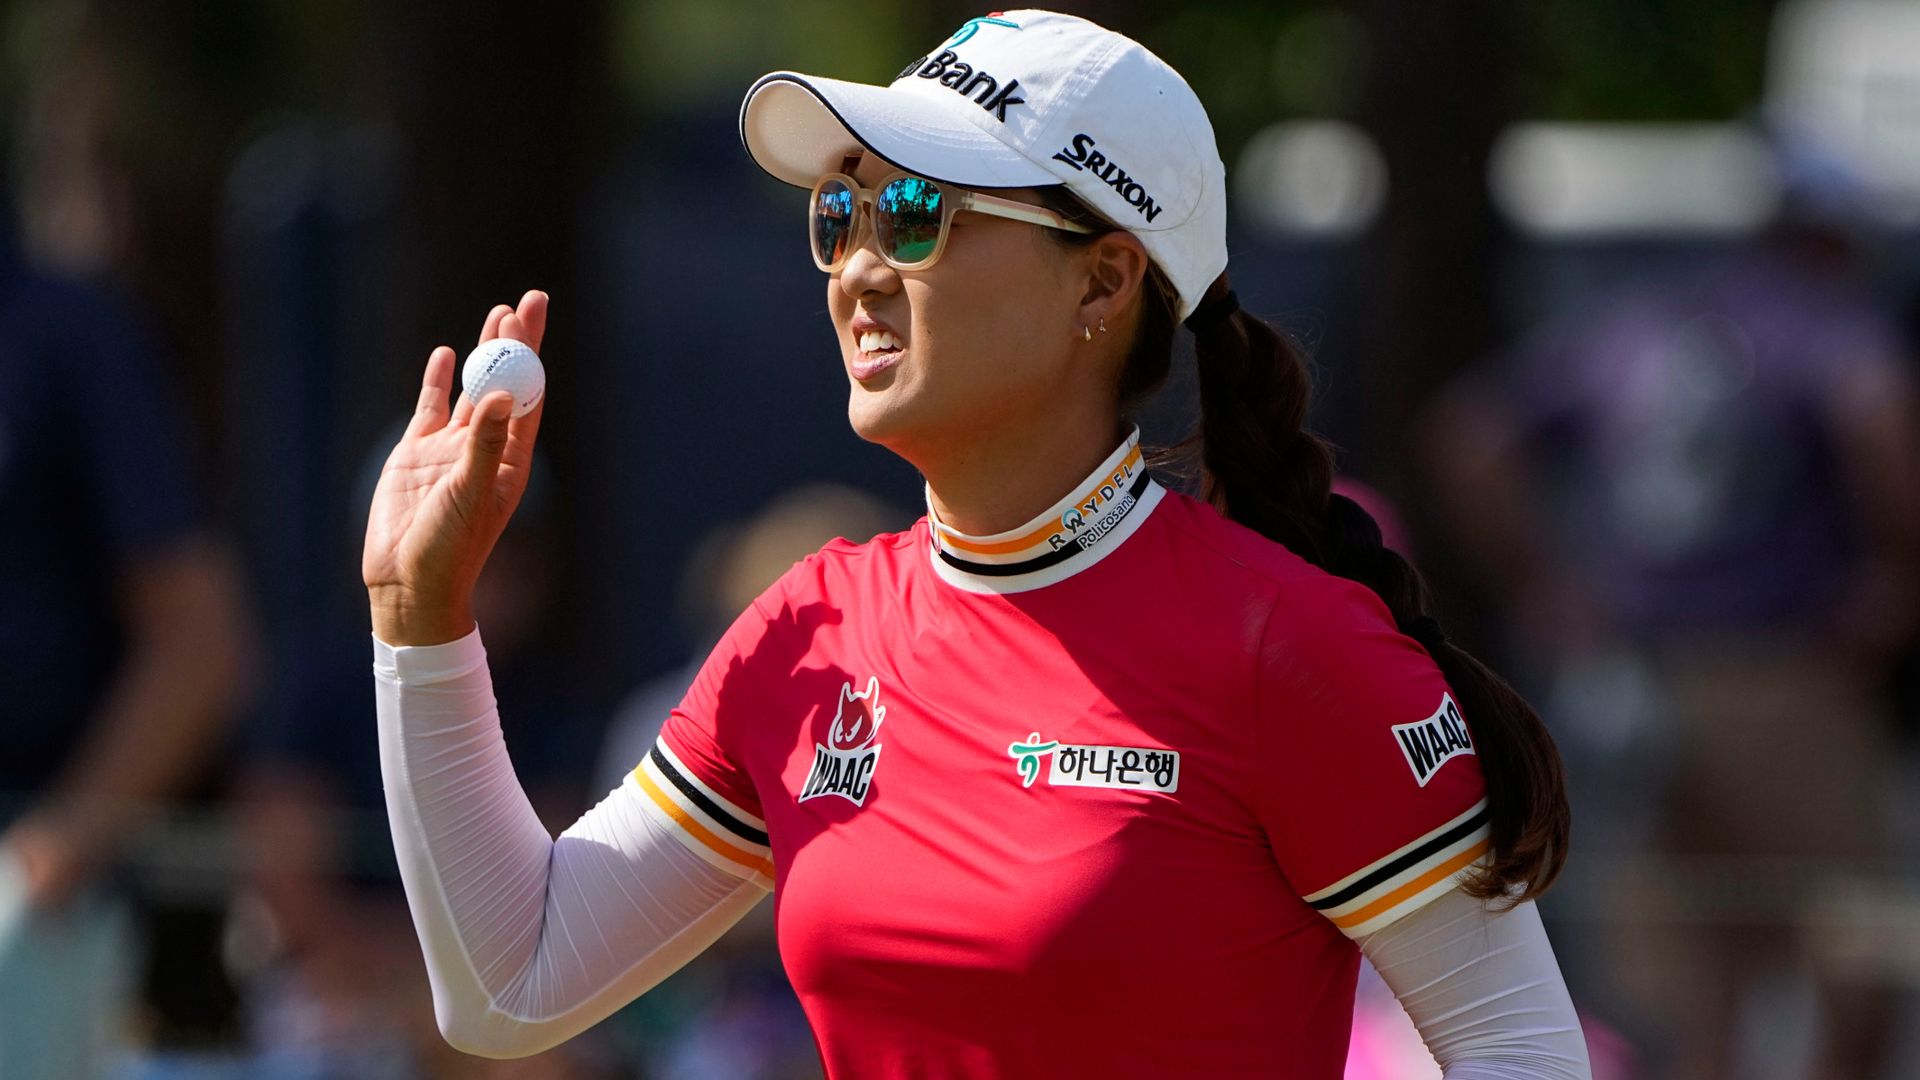 Lee breaks 23-year-old 54-hole record at US Women's Open to strengthen lead